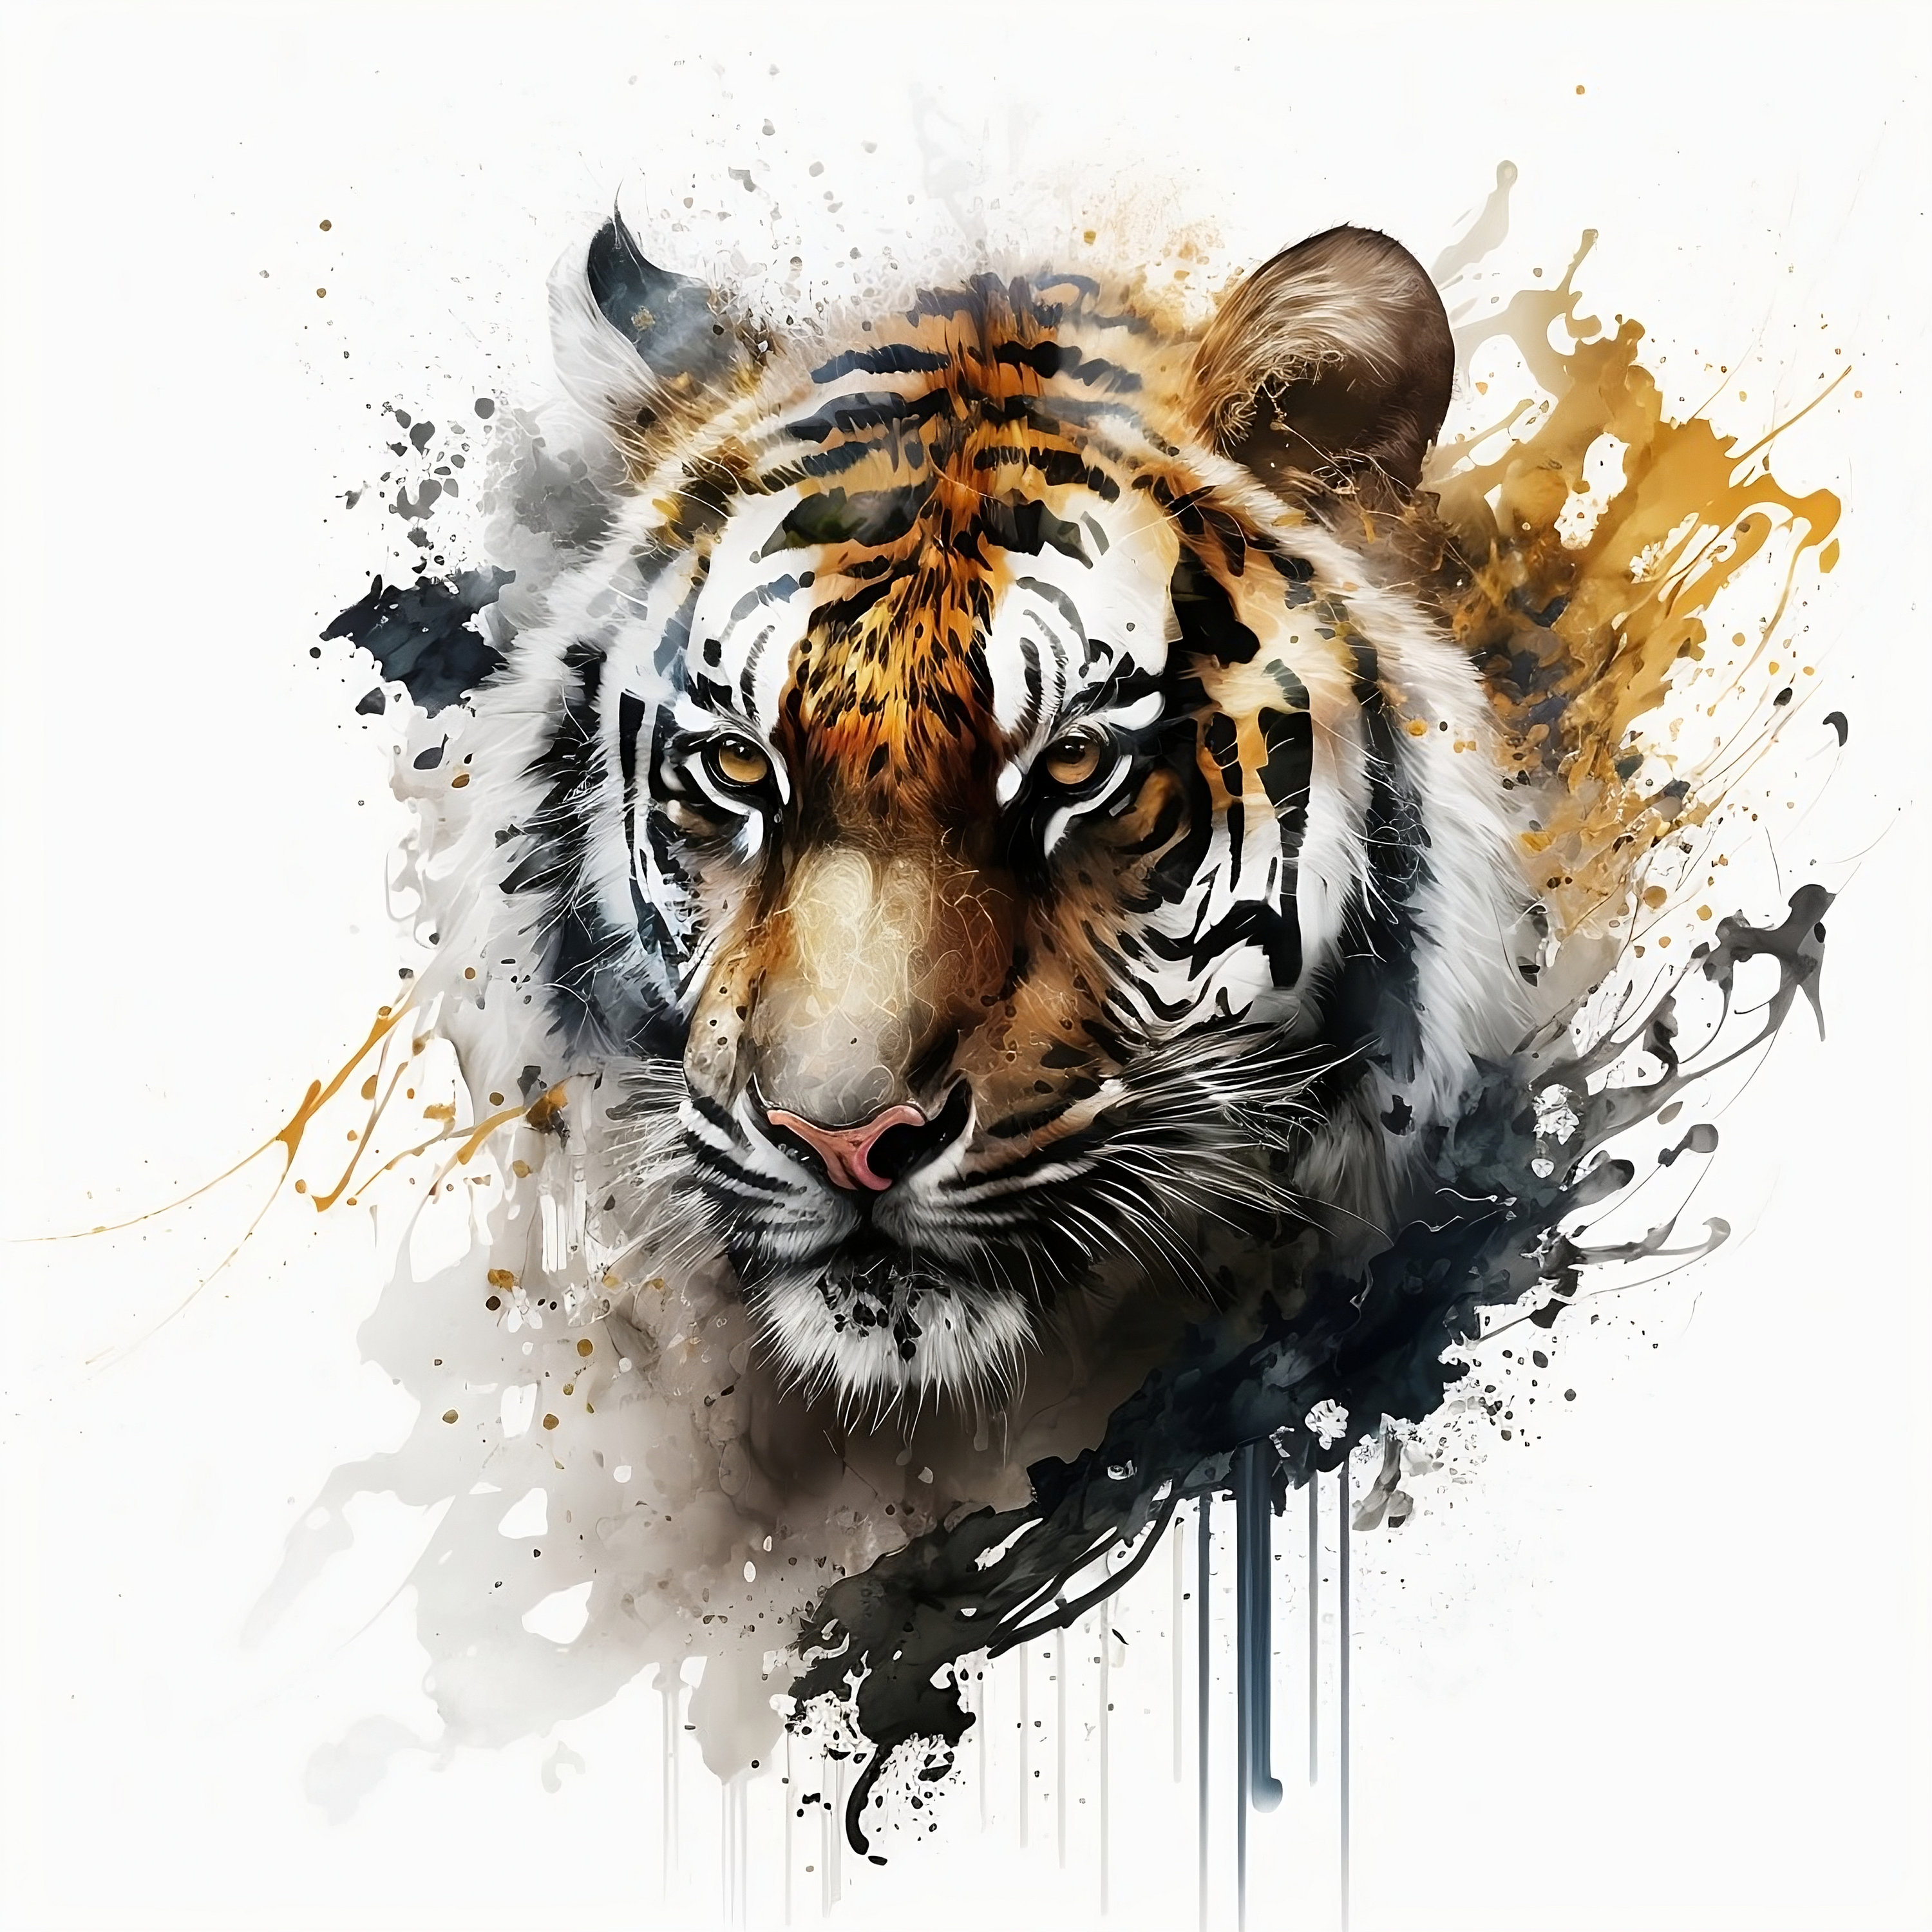 Tiger Tattoo Designs To Express Your Bravery - Cultura Colectiva